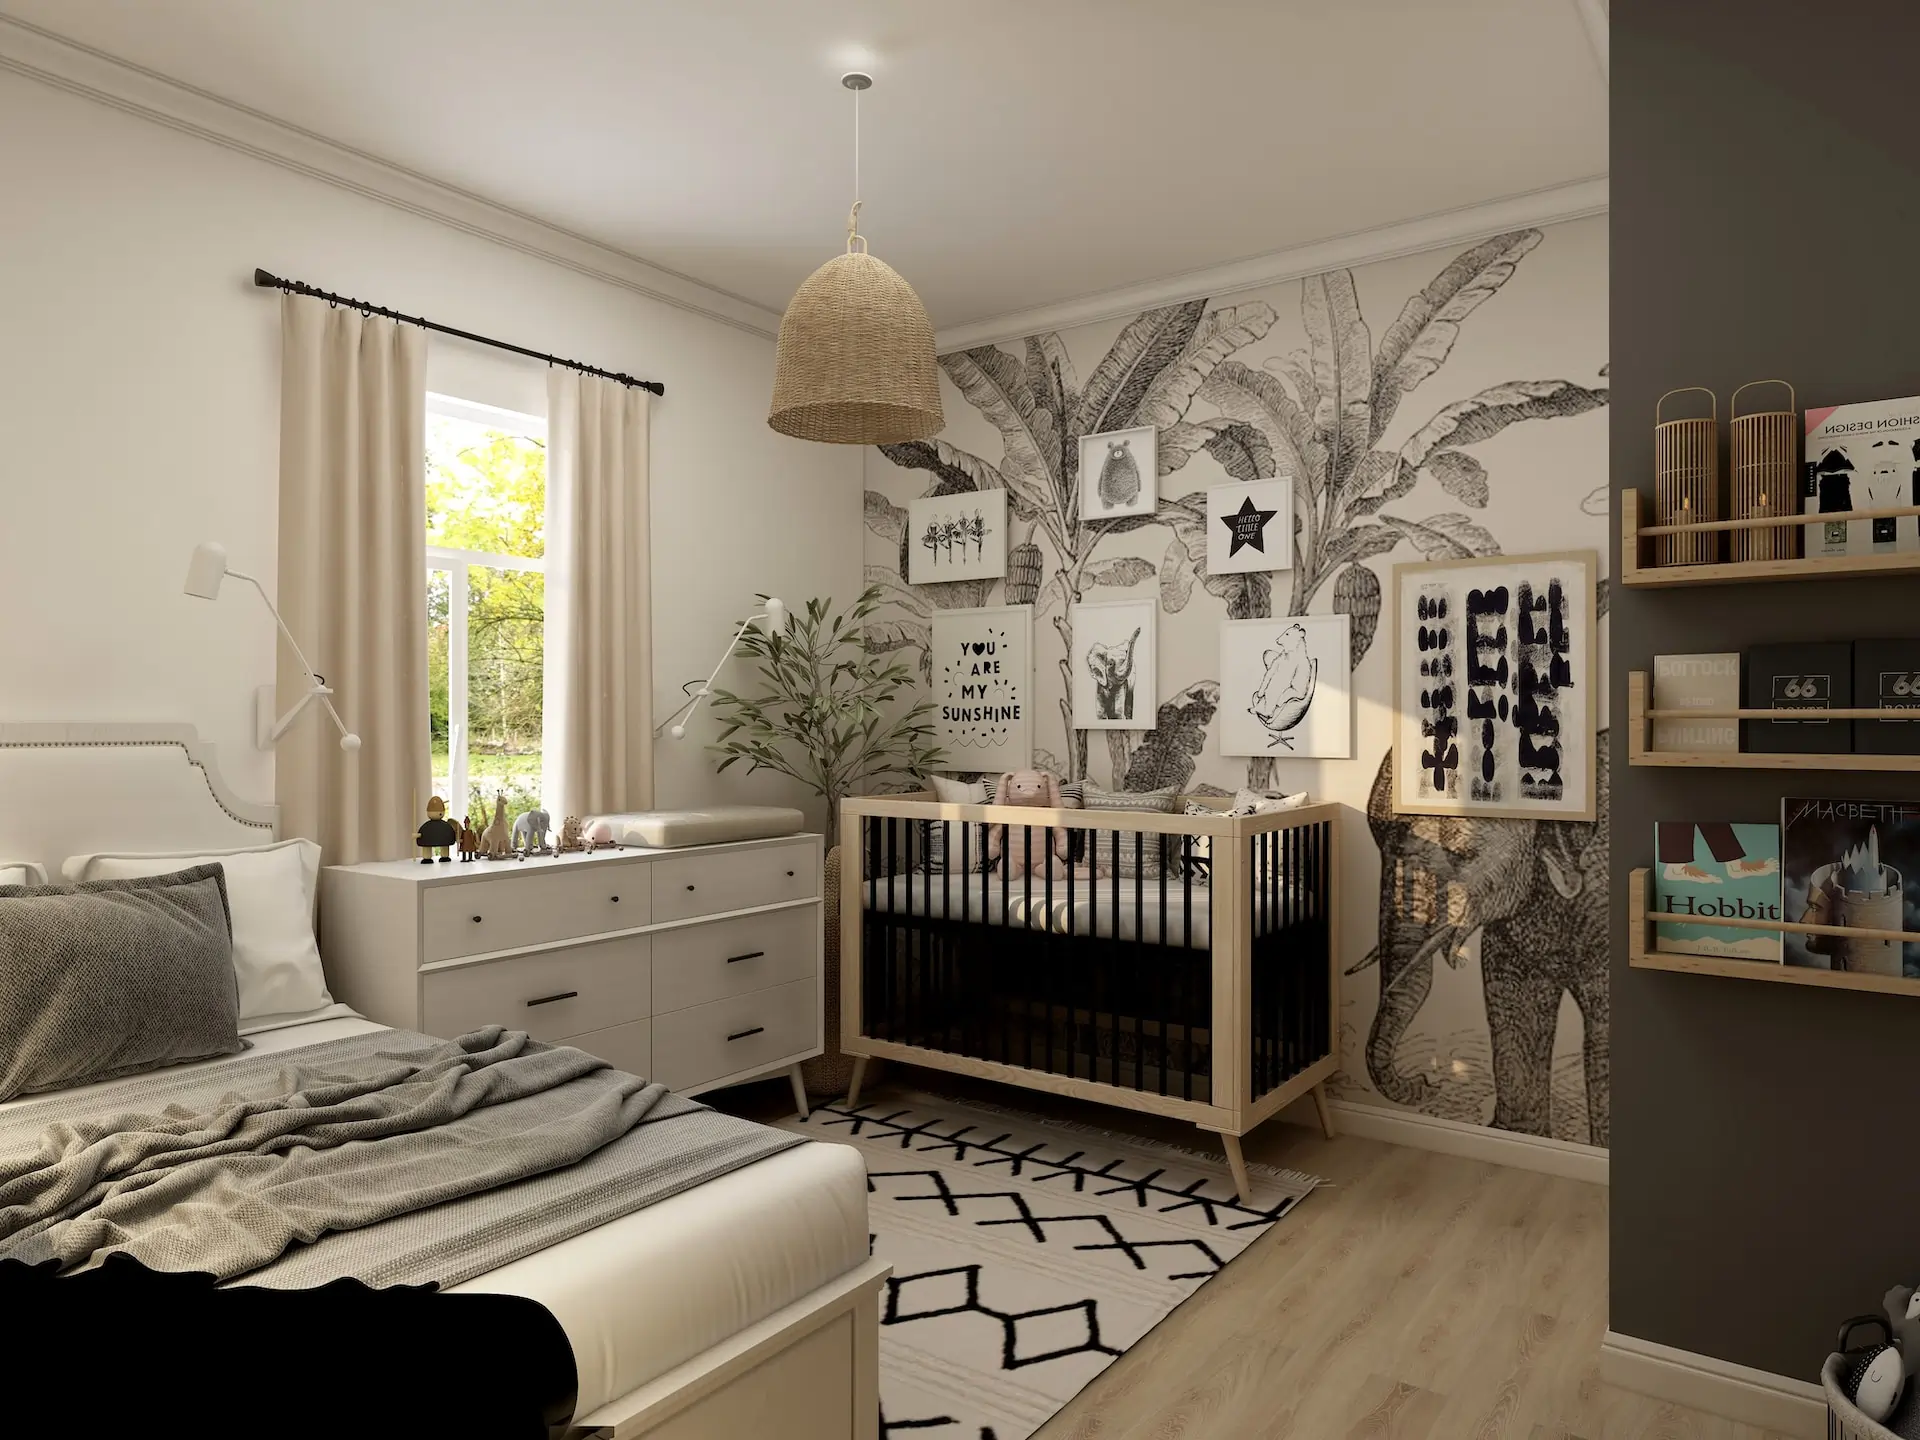 How-to-Design-a-Nursery-Room-Tips-by-Expert-Interior-Designers